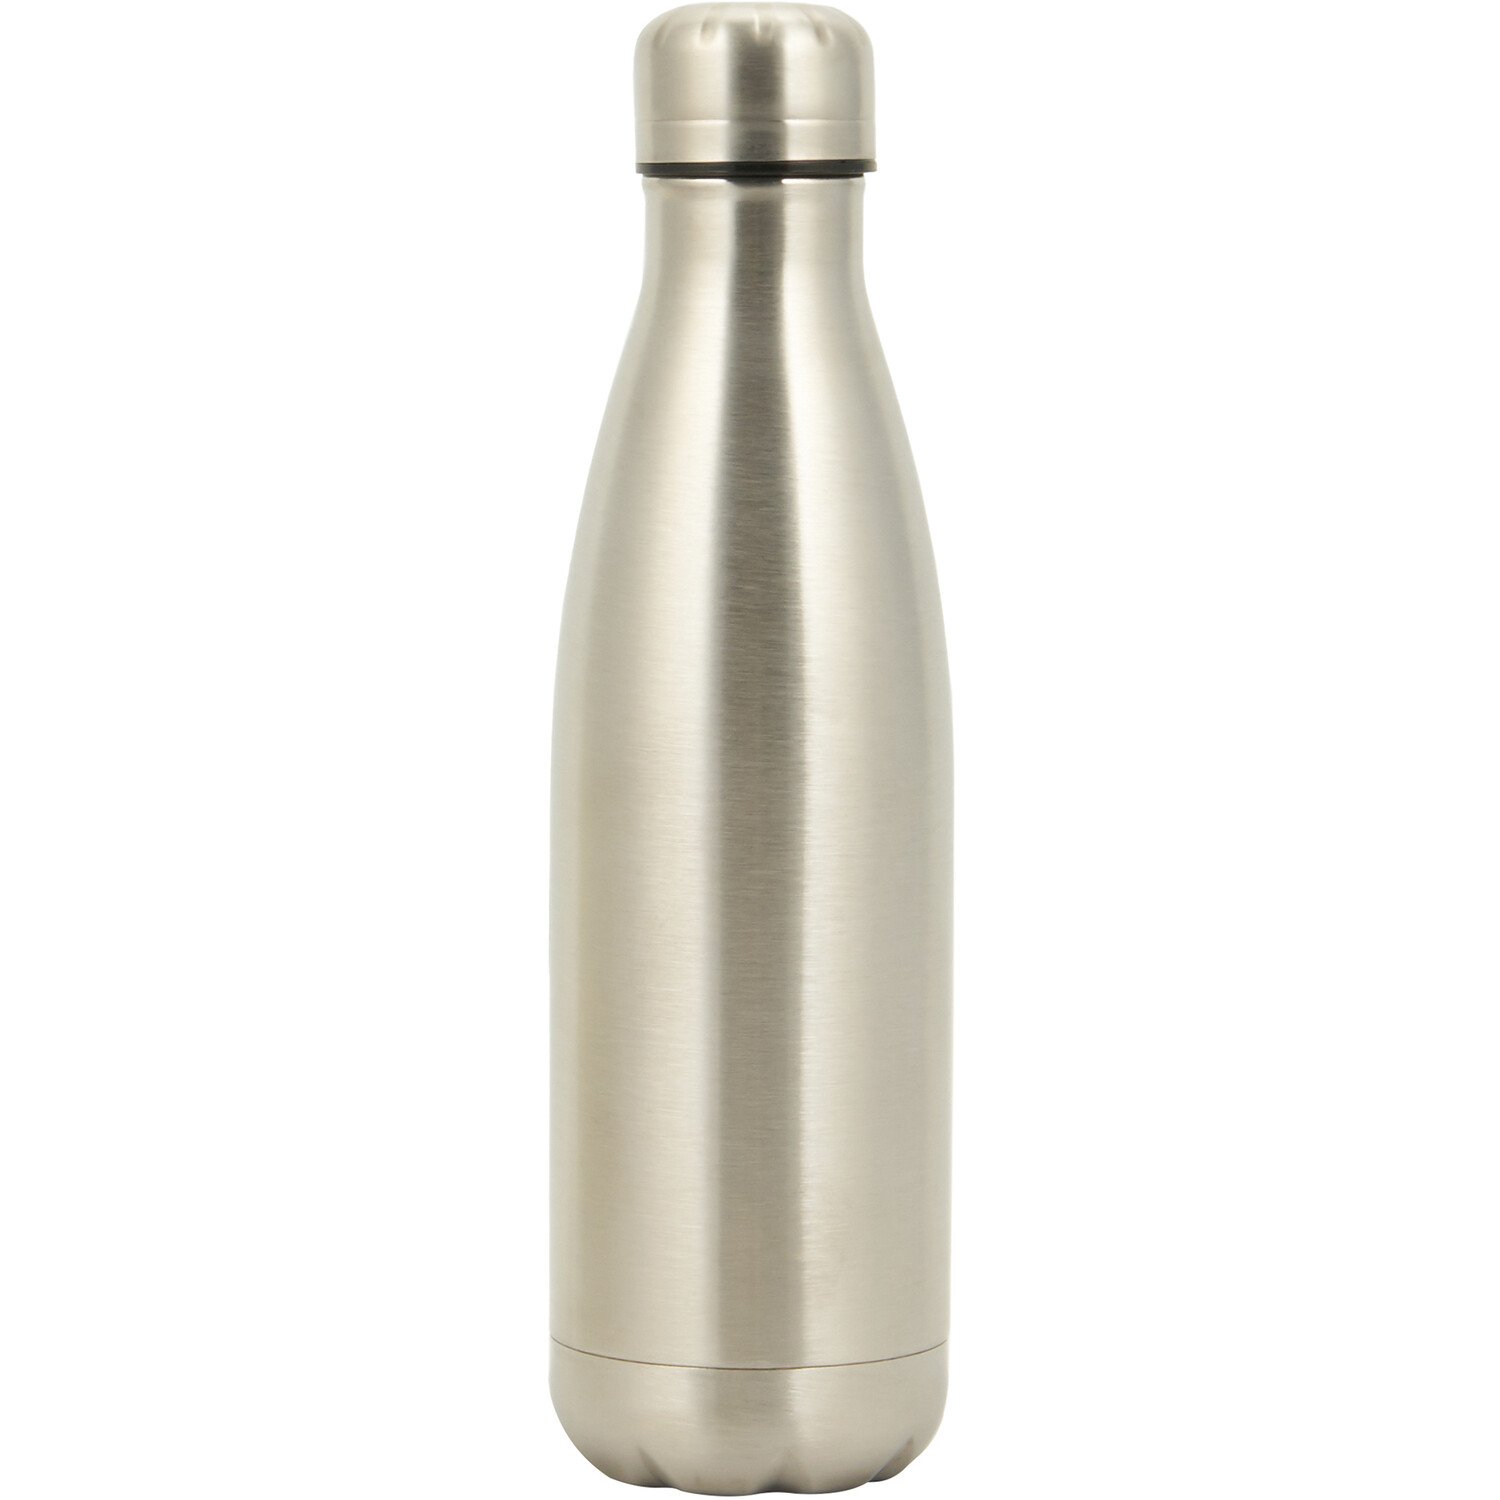 Nitro Everyday 2-in-1 Flask and Bottle - Gold Image 1